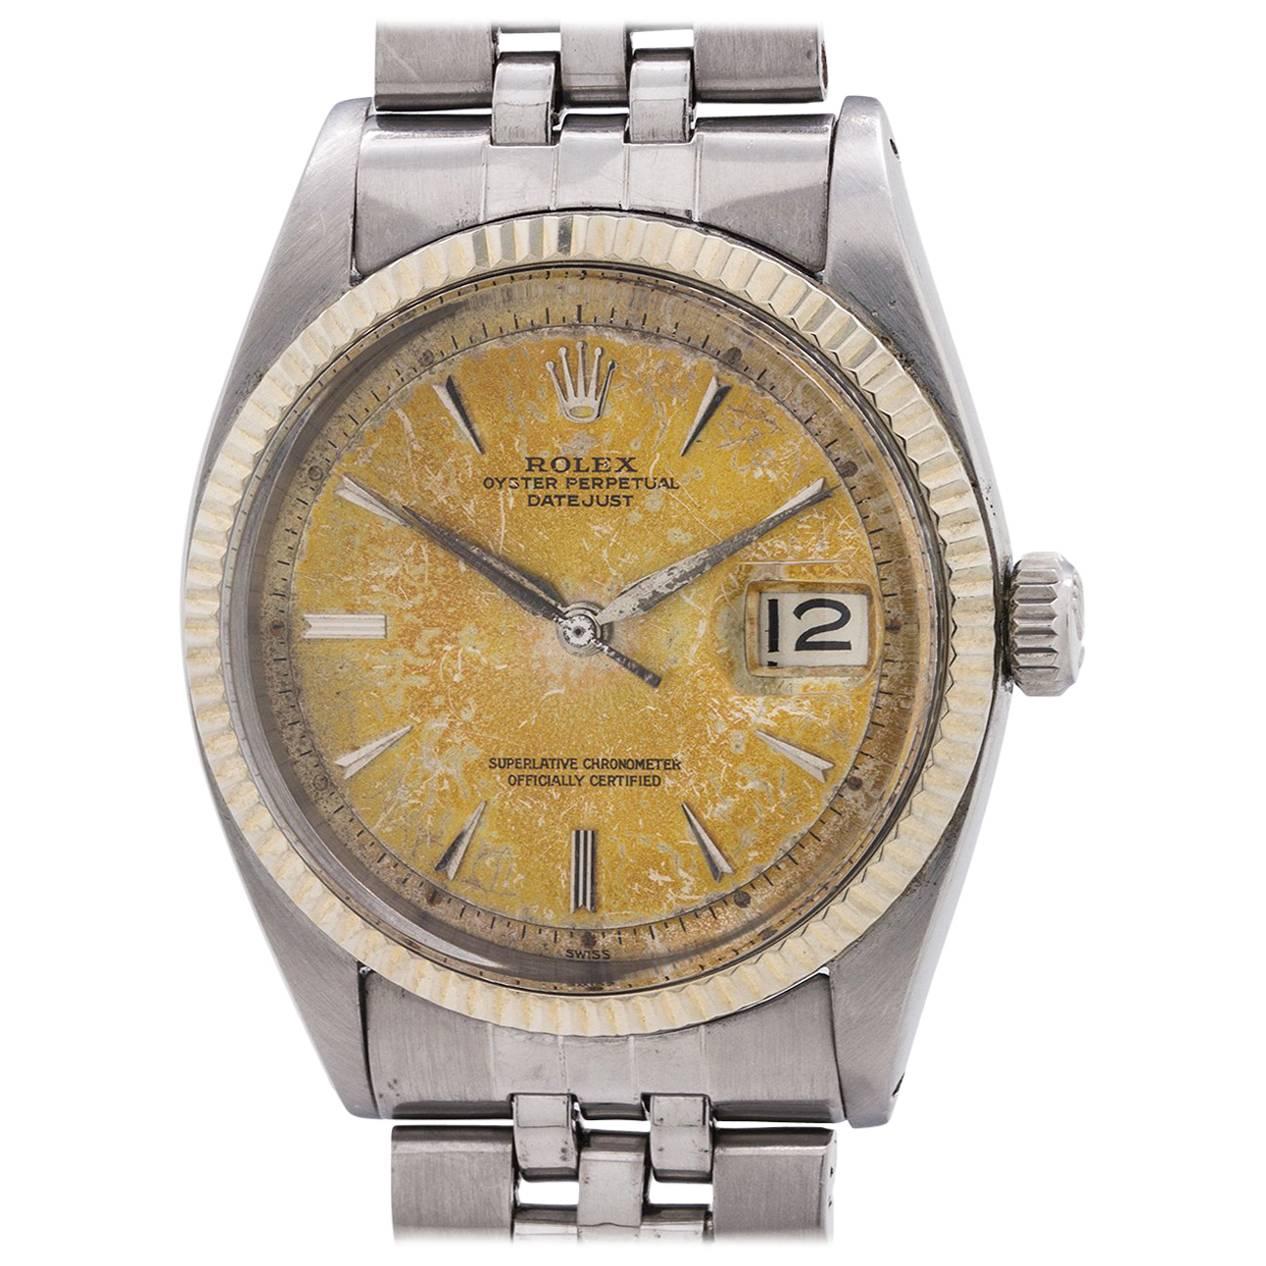 Rolex Stainless Steel Datejust Self Winding Wristwatch ref 1601, circa 1963 For Sale